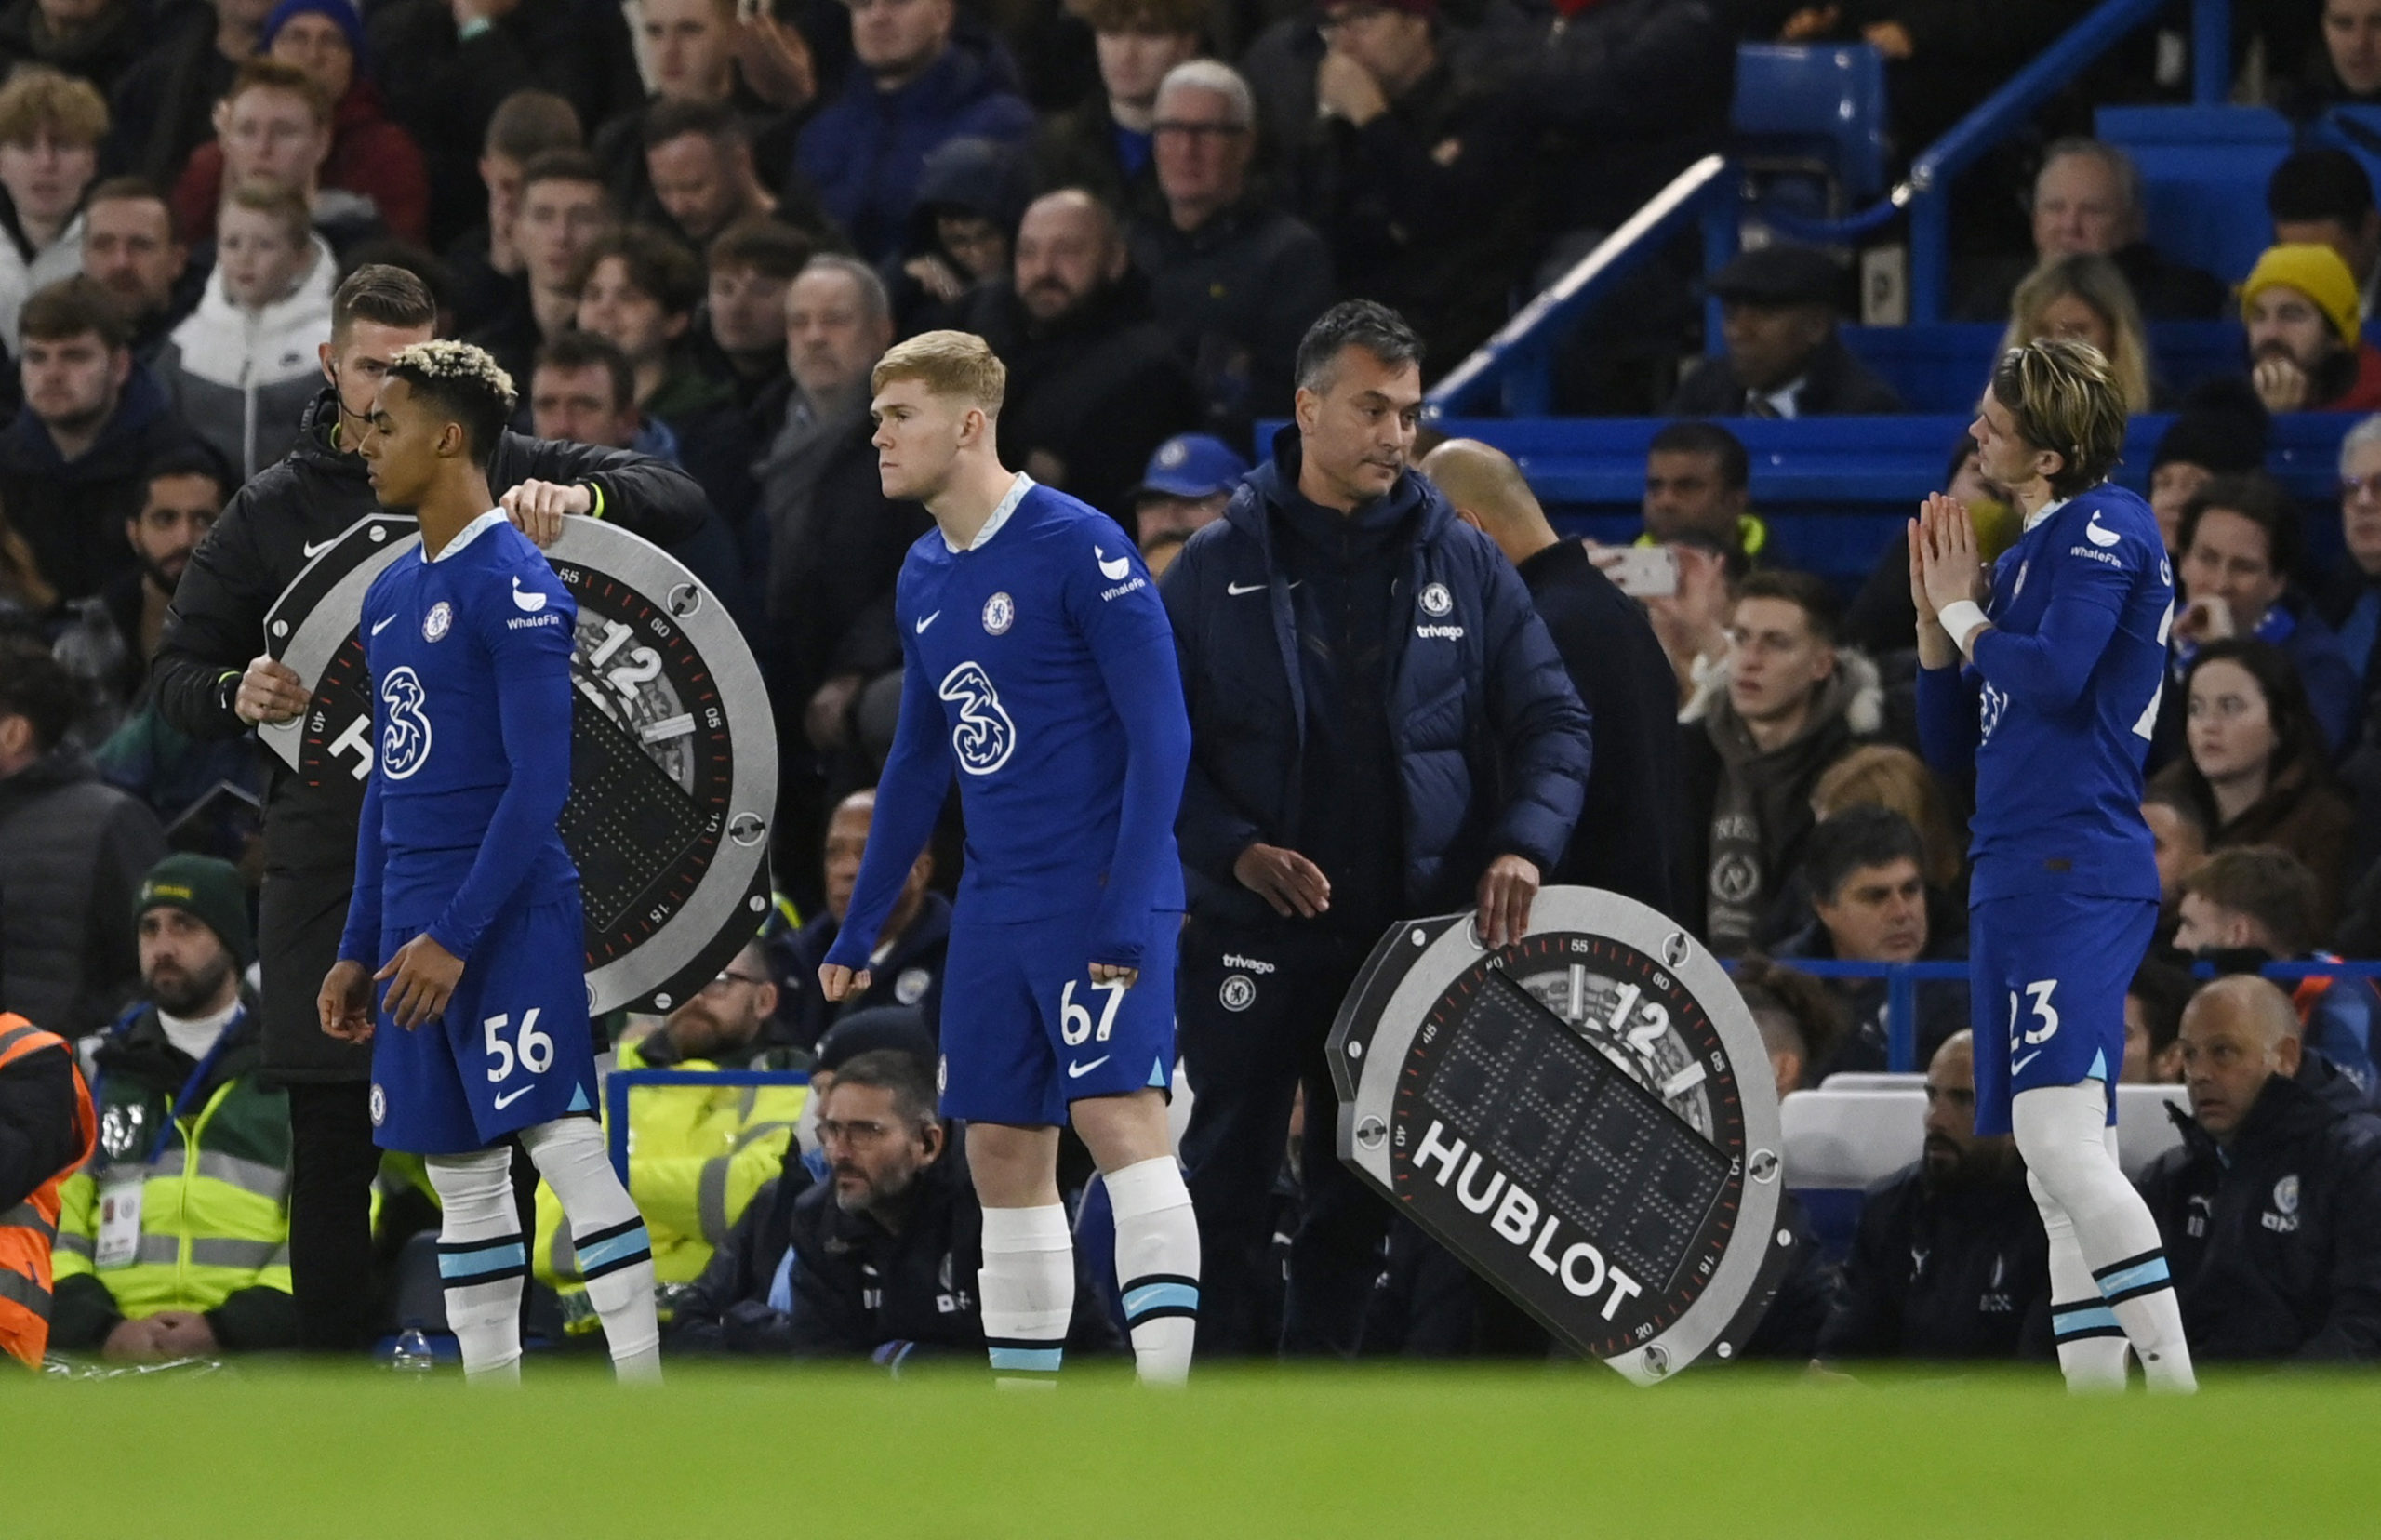 Soccer Football - Premier League - Chelsea v Manchester City - Stamford Bridge, London, Britain - January 5, 2023 Chelsea's Conor Gallagher, Lewis Hall and Omari Hutchinson come on as substitutes 